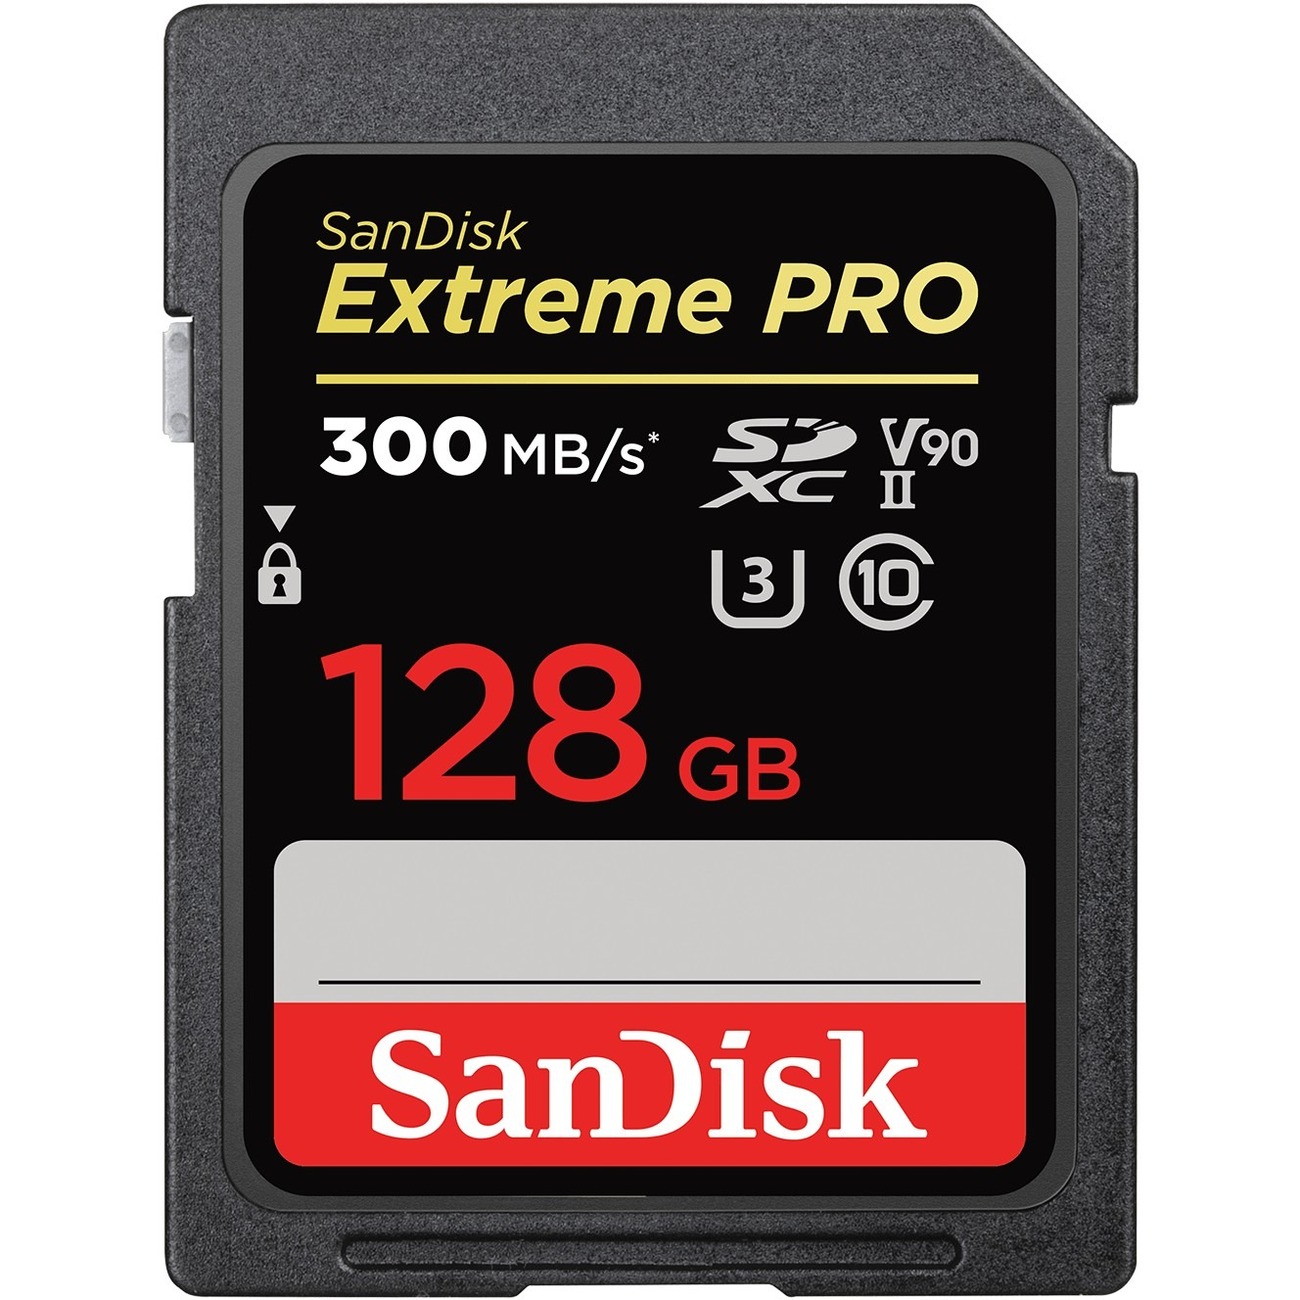 SanDisk 128GB Extreme PRO SDXC UHS-Il Memory Card - SDSDXDK-128G-GN4IN - image 2 of 2